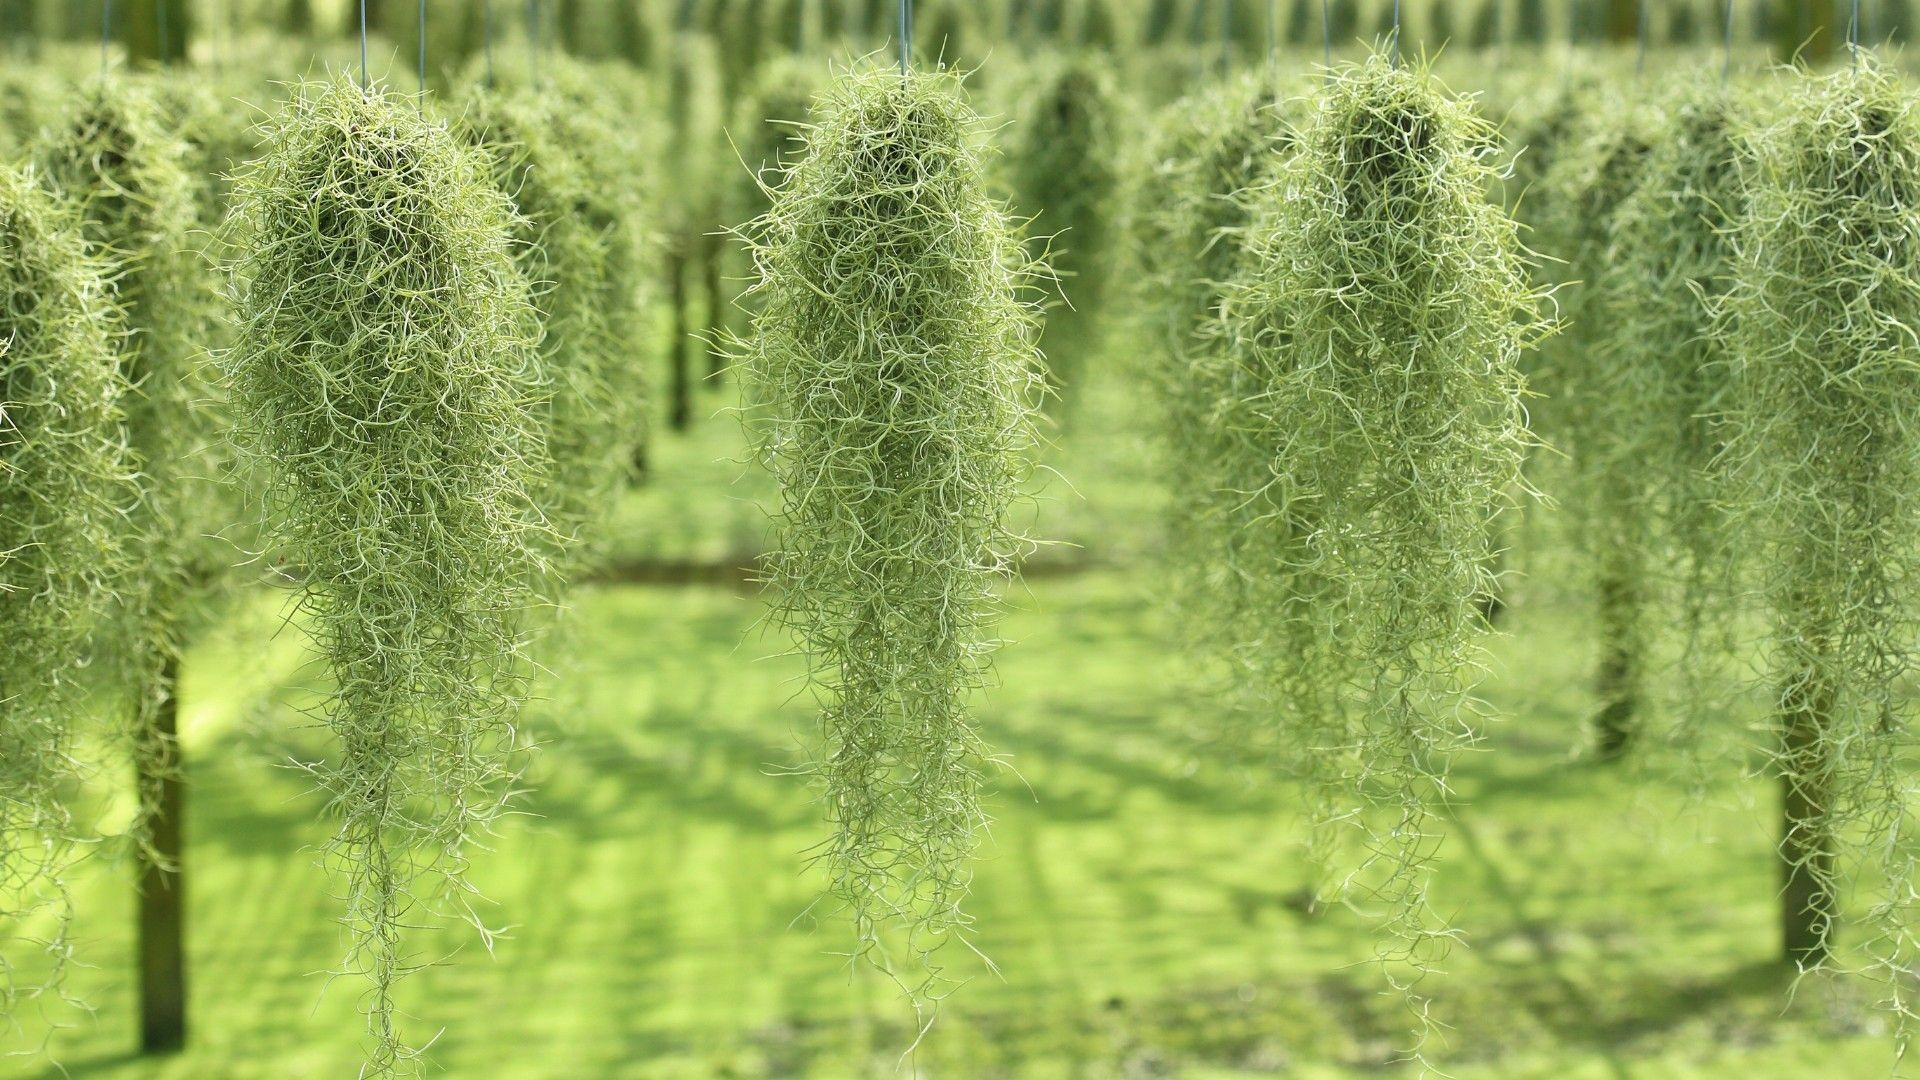 Spanish moss Care (Watering, Fertilize, Pruning, Propagation) - PictureThis